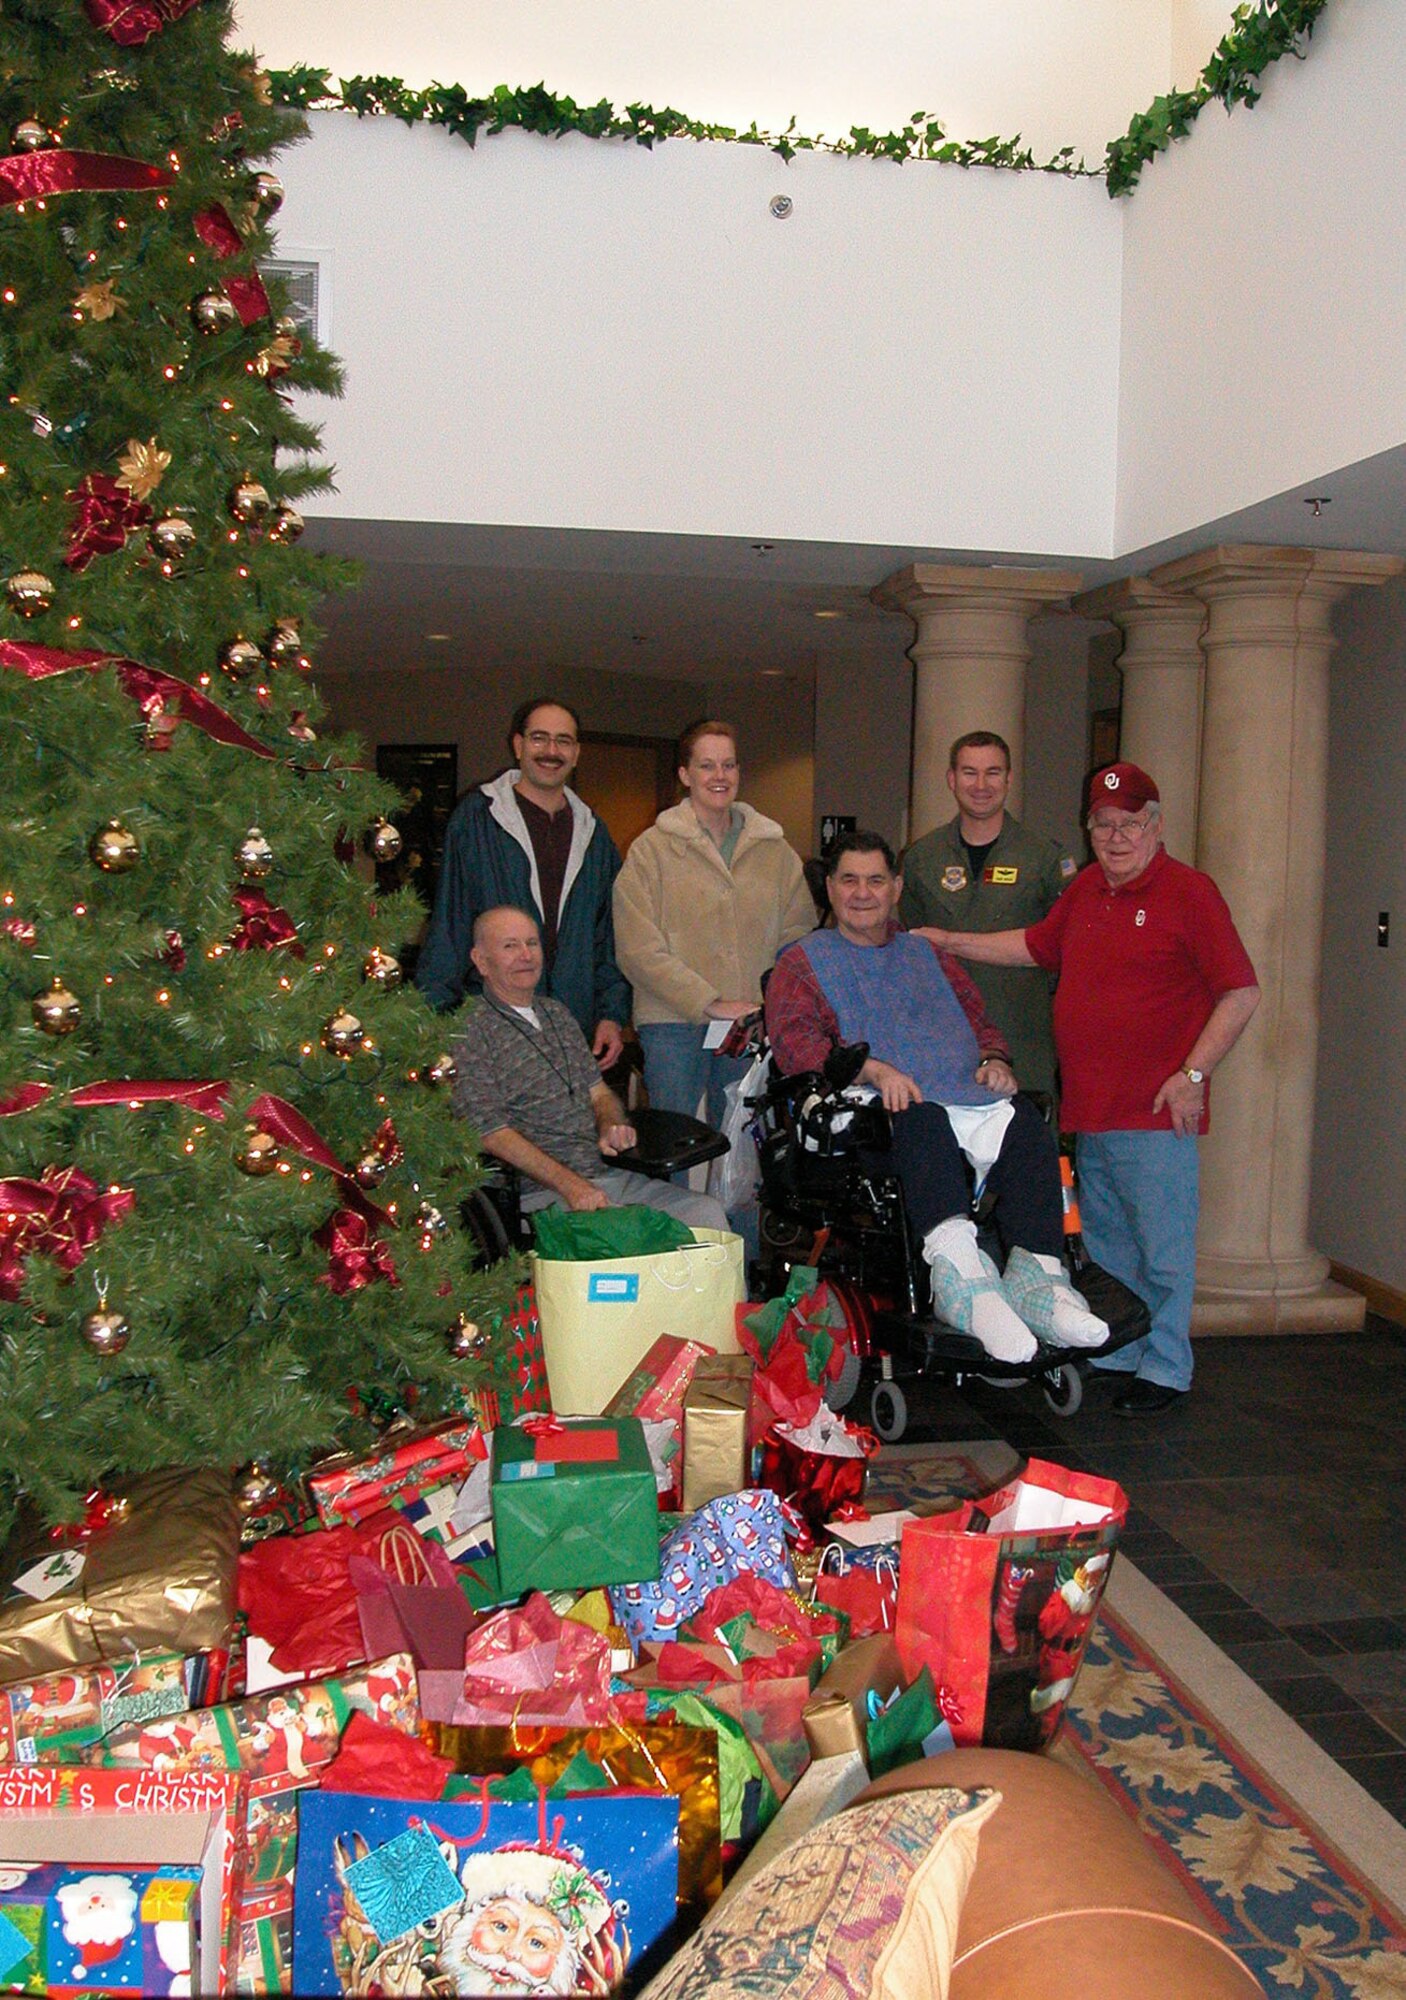 Air Force Reserve 'Angels' (Back row left to right) SMSgt. Bob Gaspar, SSgt. Colleen Rehm and Maj. Jimmy Wolfe pose with residents of the Norman Veterans Center during 2004.  Reservists from the 507th Air Refueling Wing and 513th Air Control Group surpassed last year's 179 gifts to provide 254 gifts for center residents in 2005 year.  A party for the veterans will be held December 22.